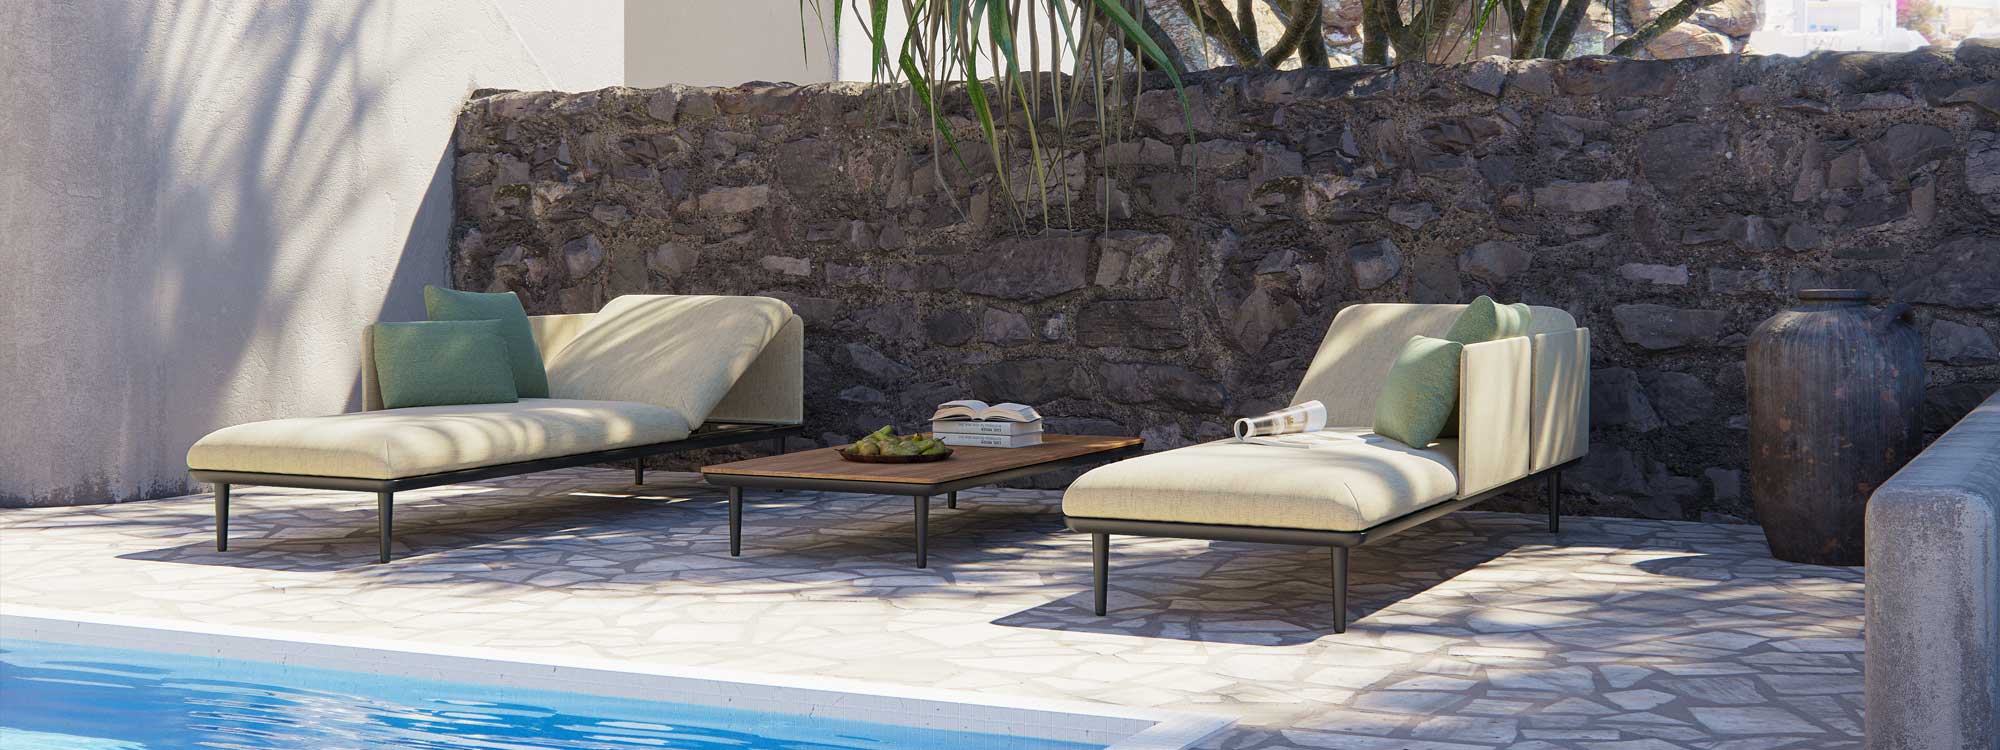 Image of modern garden daybeds by Royal Botania around poolside